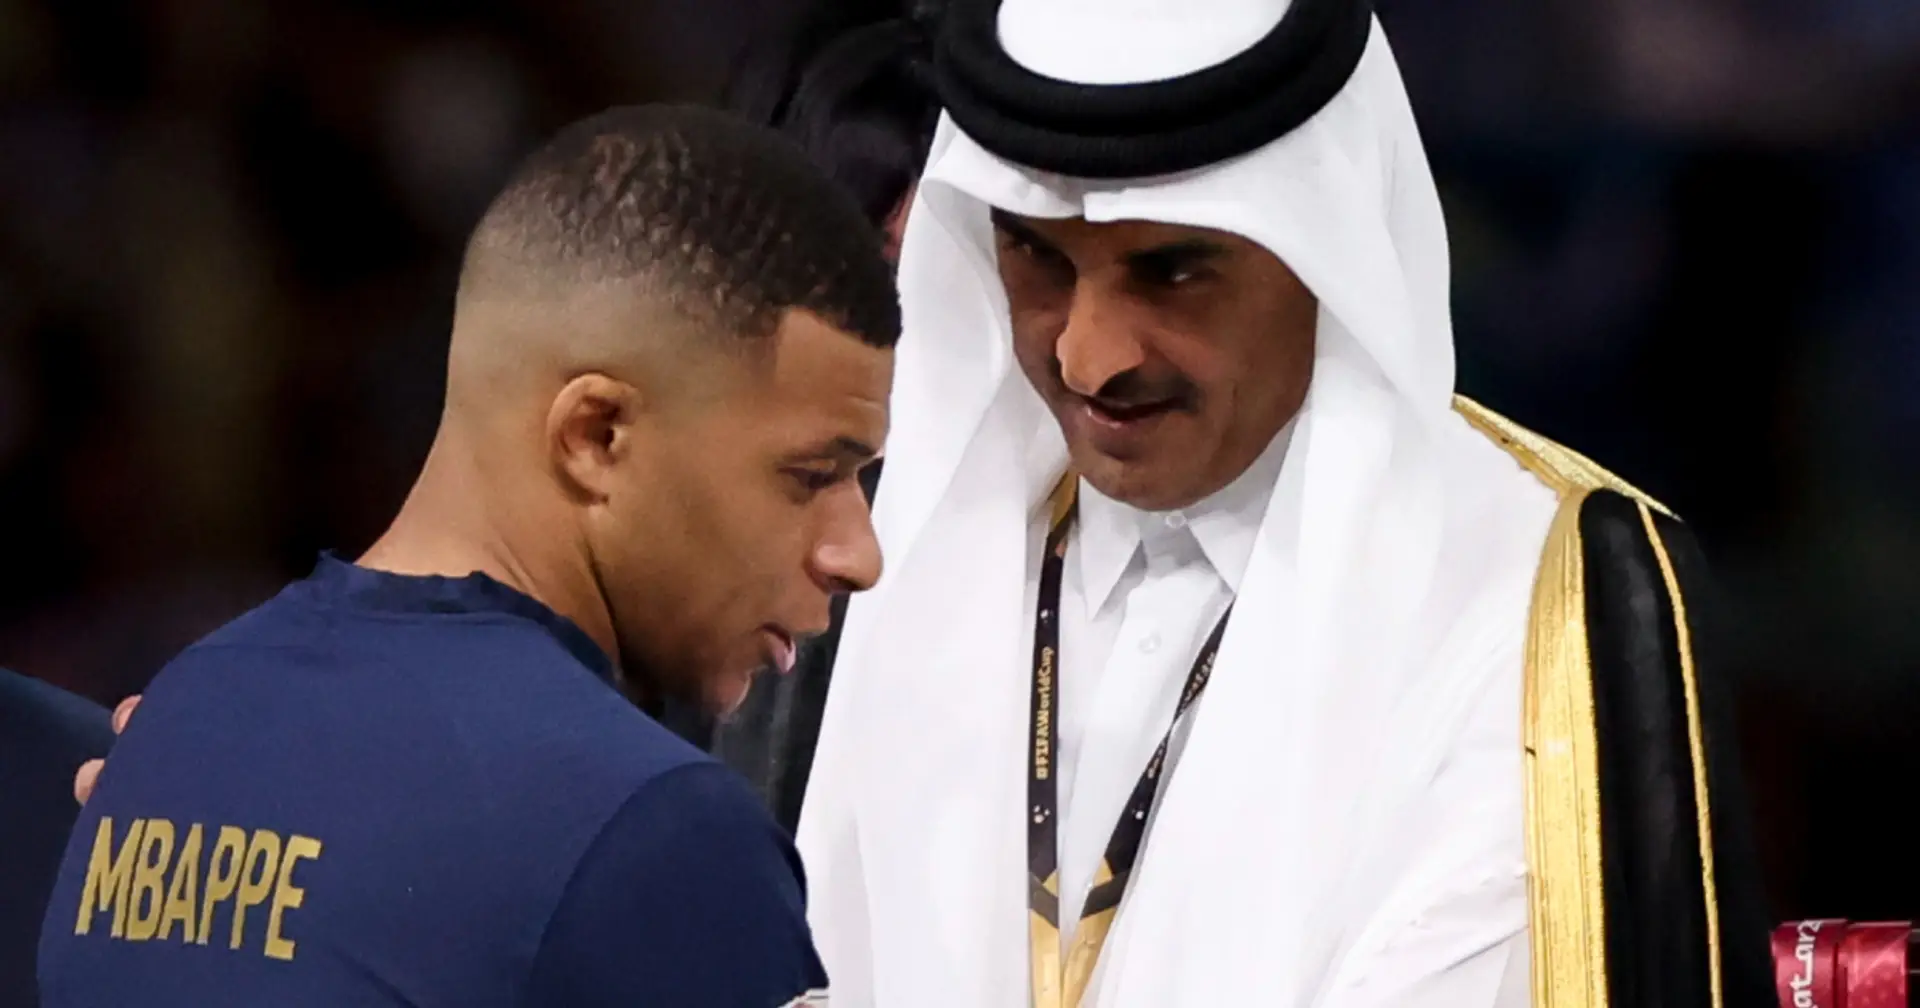 Mbappe invited for 'showdown meeting' with France president and Qatar emir 